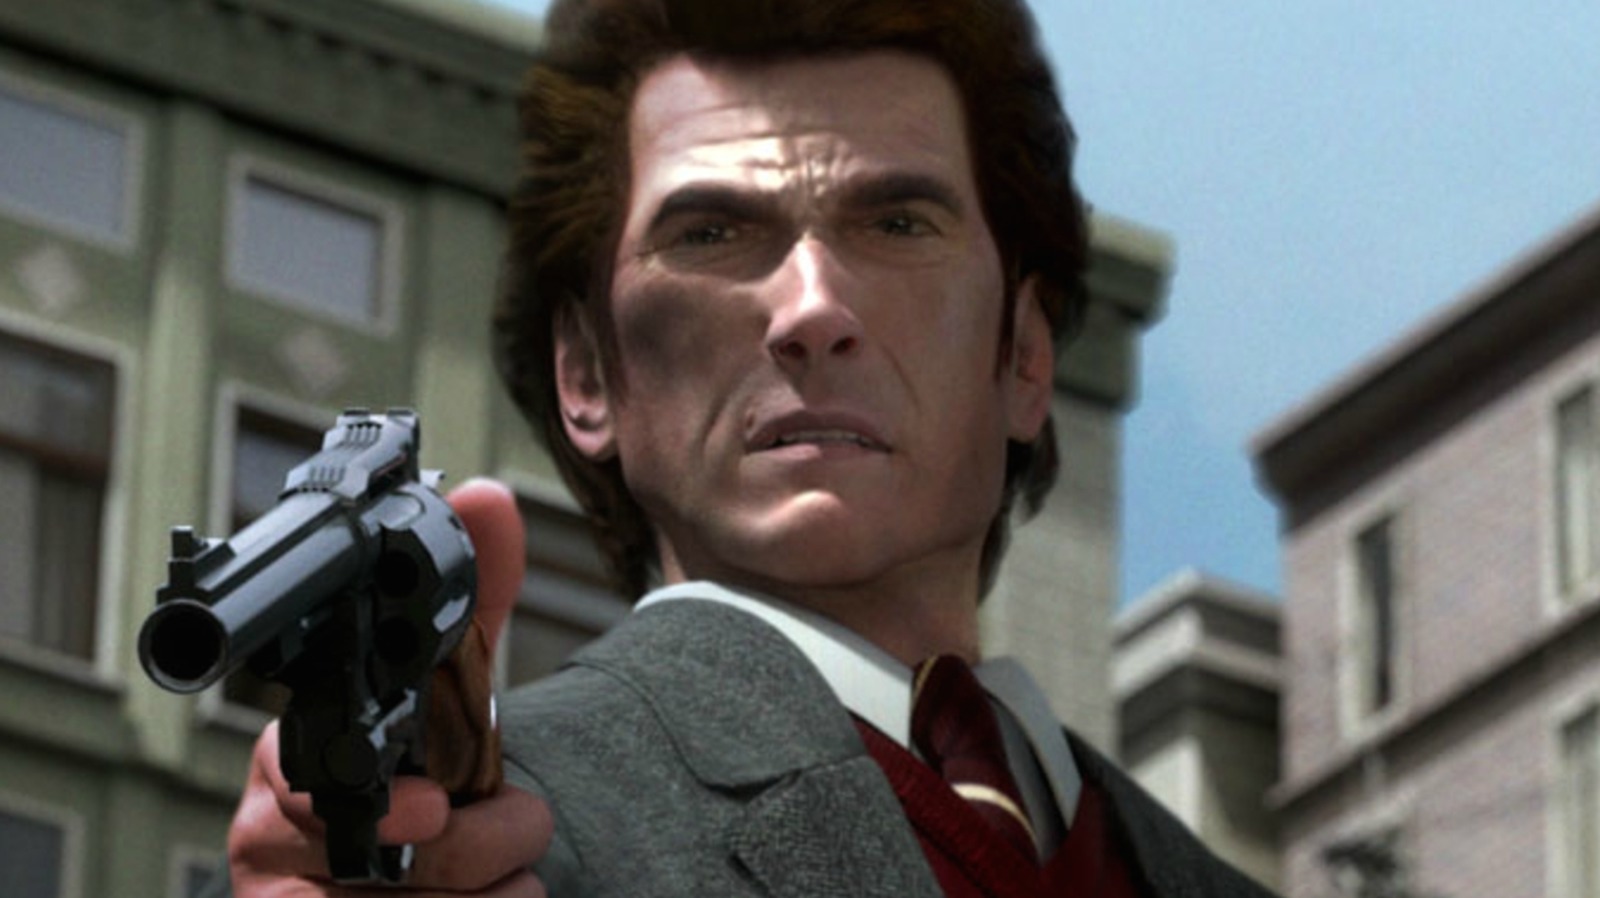 https://www.svg.com/img/gallery/the-canceled-dirty-harry-video-game-well-never-get-to-play/l-intro-1608745551.jpg